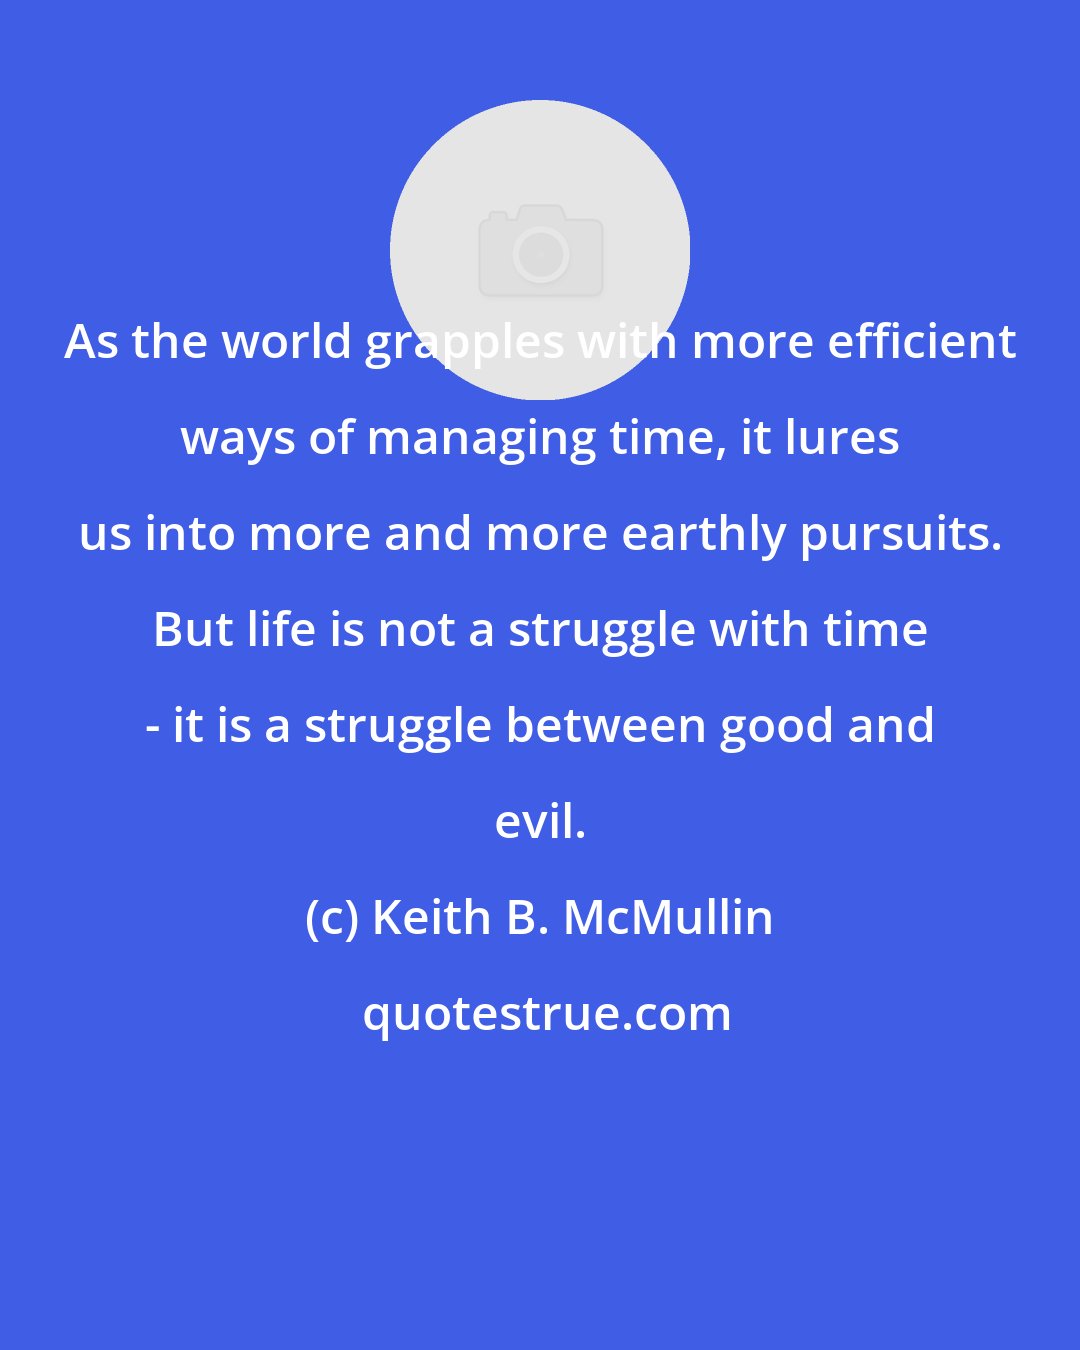 Keith B. McMullin: As the world grapples with more efficient ways of managing time, it lures us into more and more earthly pursuits. But life is not a struggle with time - it is a struggle between good and evil.